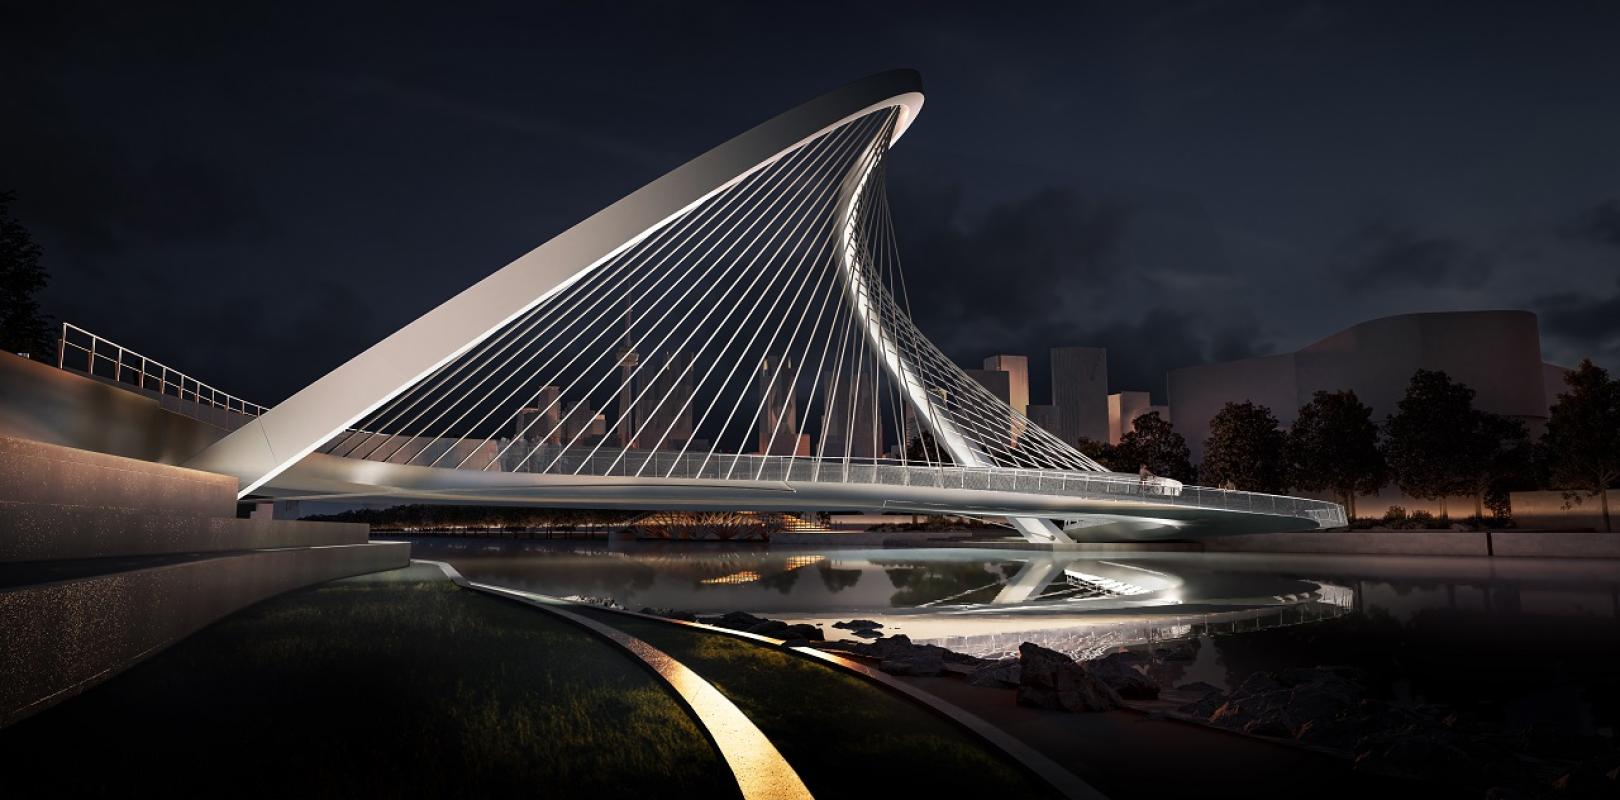 A curvy arched pedestrian bridge shown in a night view rendering.